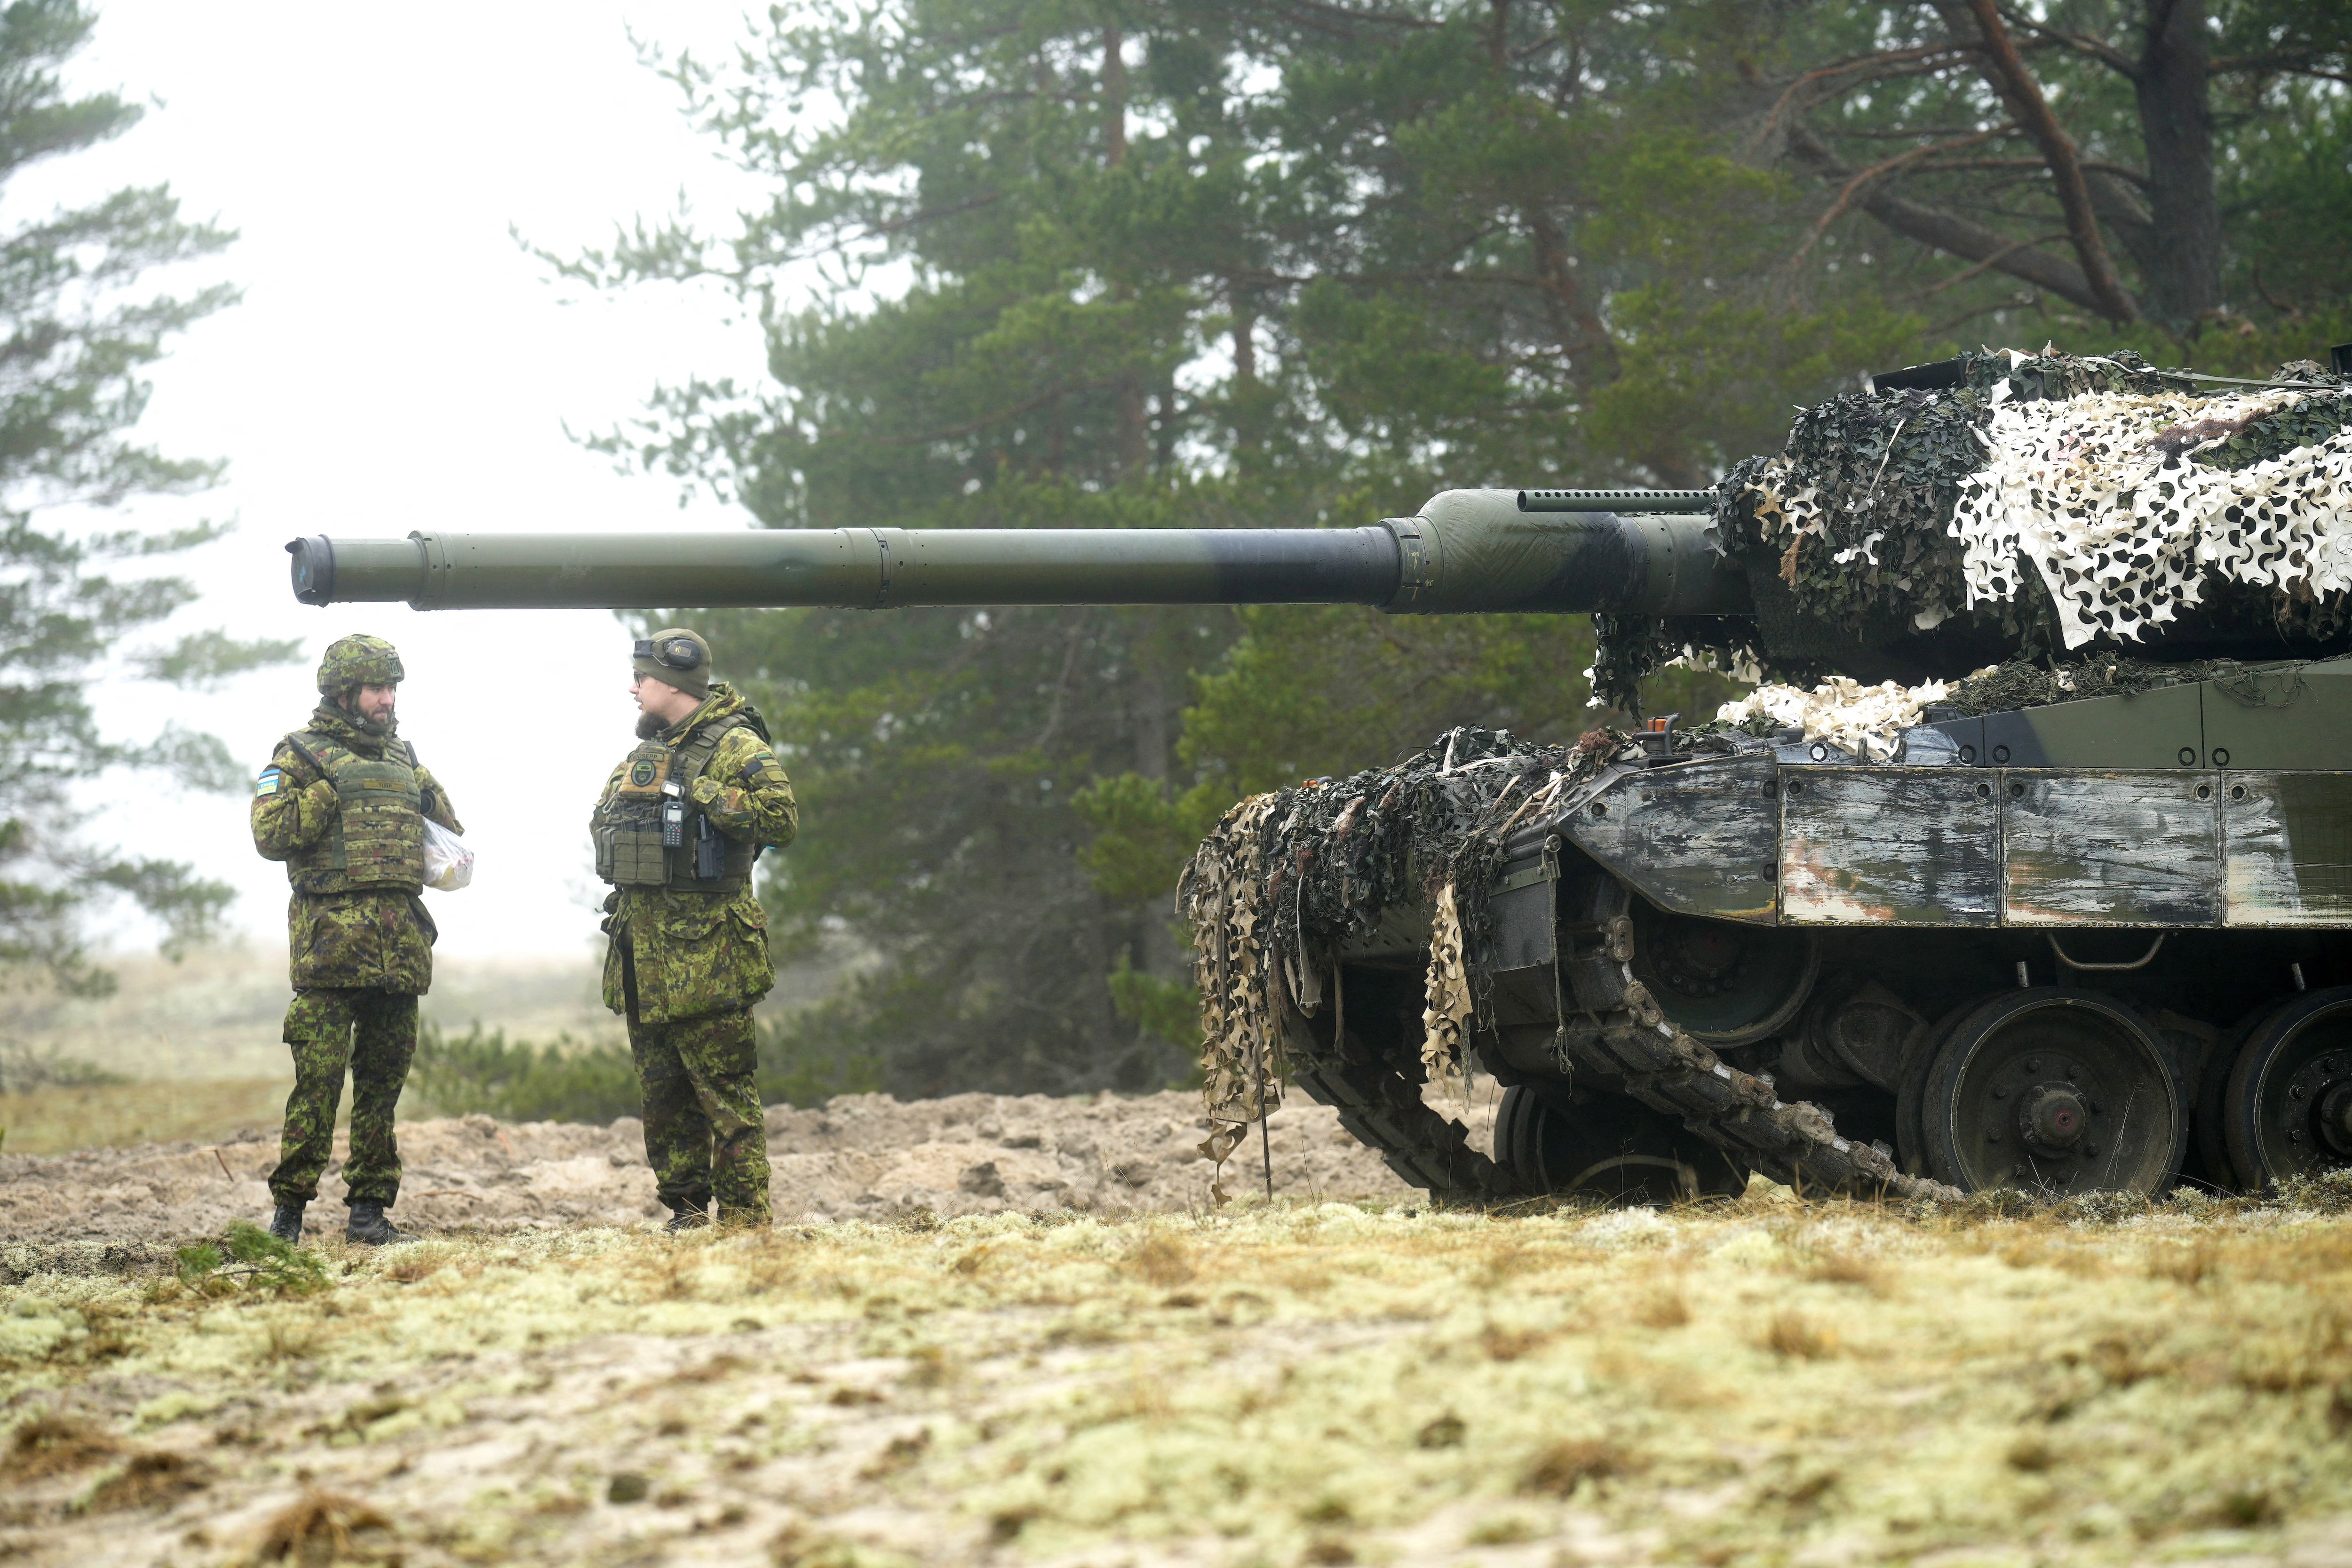 Estonian army servicemen guard their CV-90 infantry fighting vehicle during live fire exercise in Perakula, Estonia February 15, 2023. REUTERS/Ints Kalnins